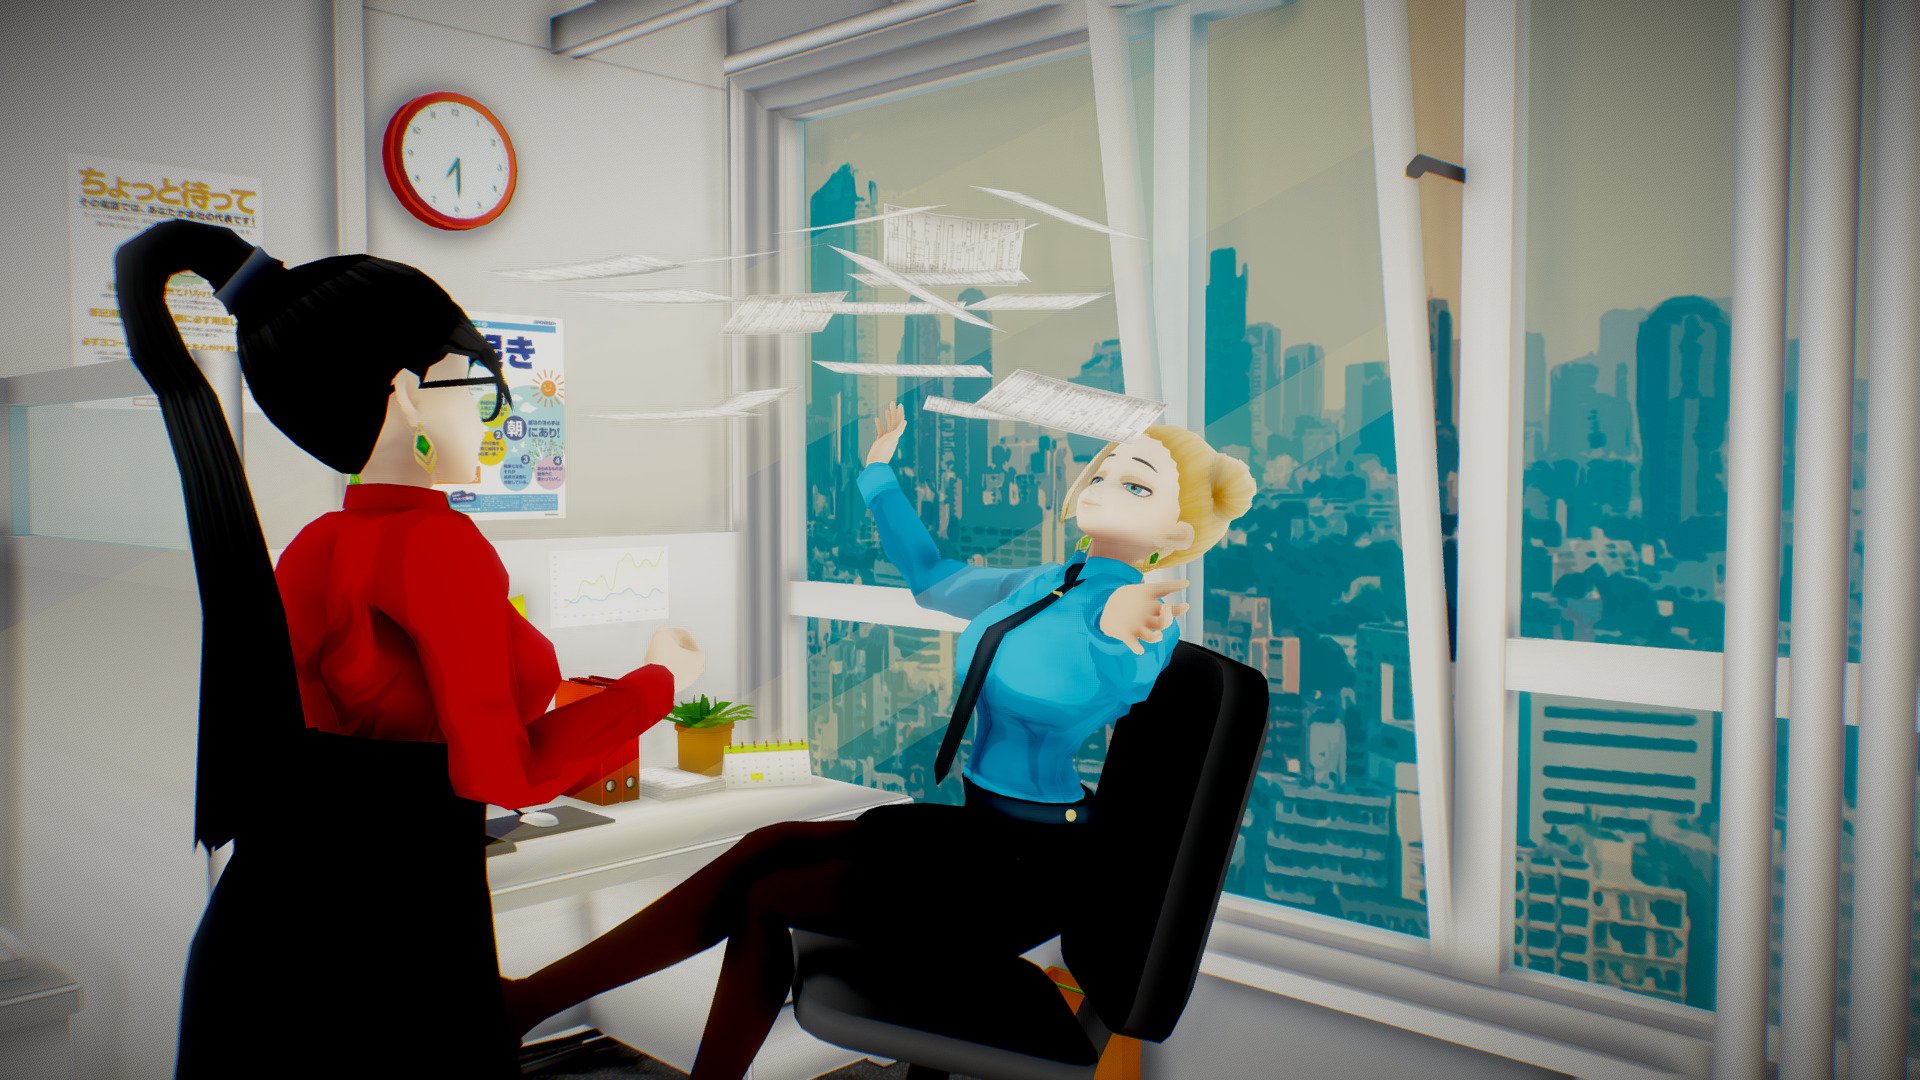 Anime looking characters in an office scene.
Made in blender, diffuse only handpainted textures 3d model